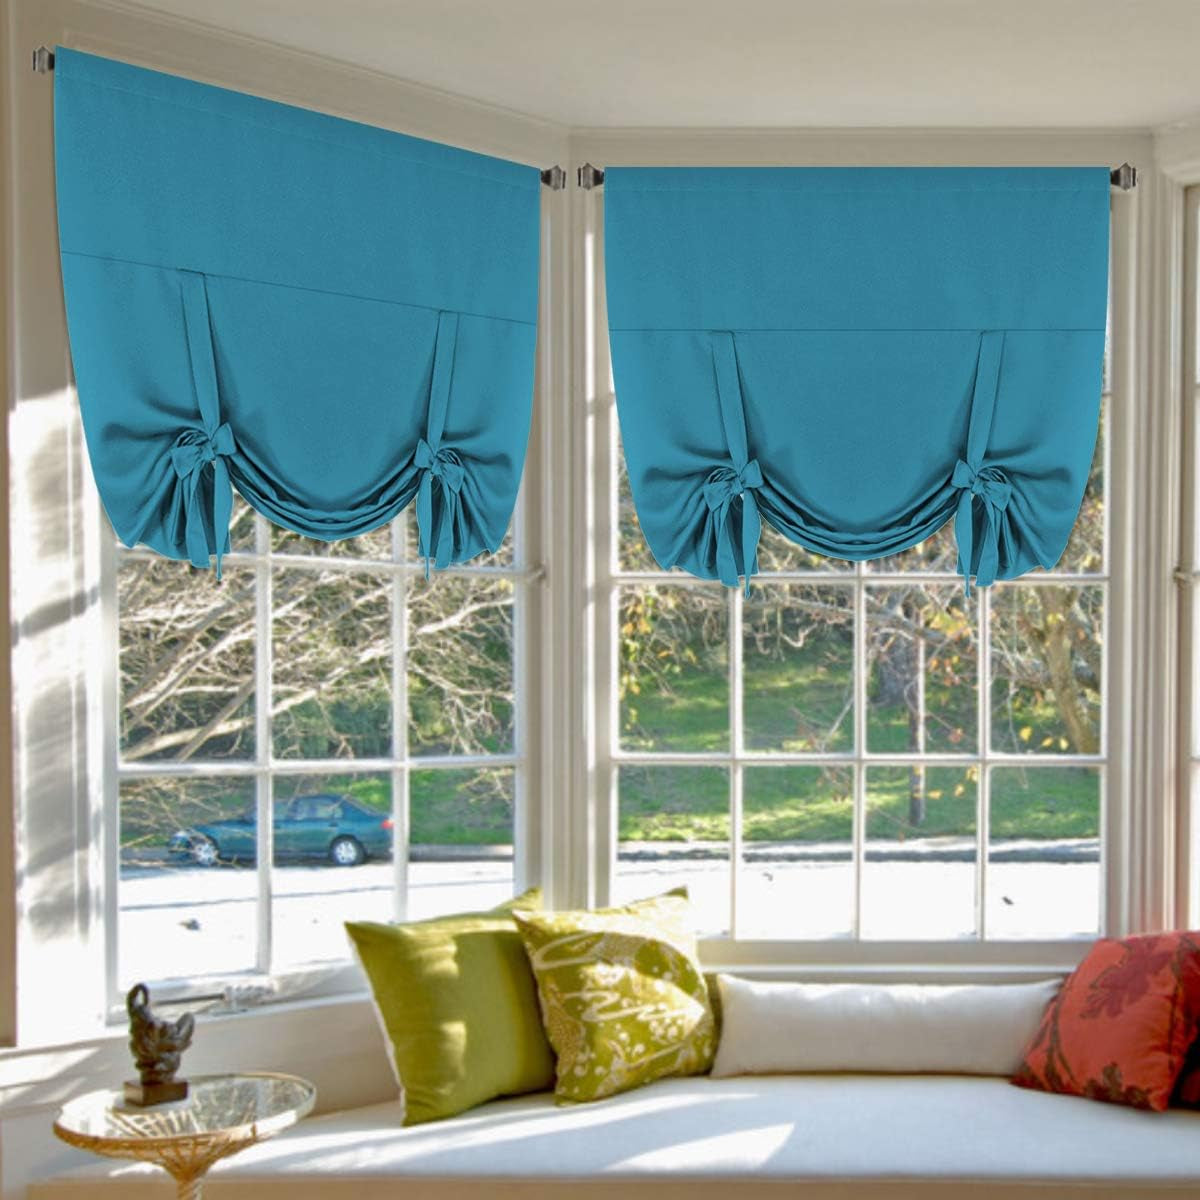 H.VERSAILTEX Tie up Curtain Thermal Insulated Room Darkening Rod Pocket Valance for Bedroom (Coral, 1 Panel, 42 Inches W X 63 Inches L)  H.VERSAILTEX Turquoise Blue W42" X L63" 2-Pack 